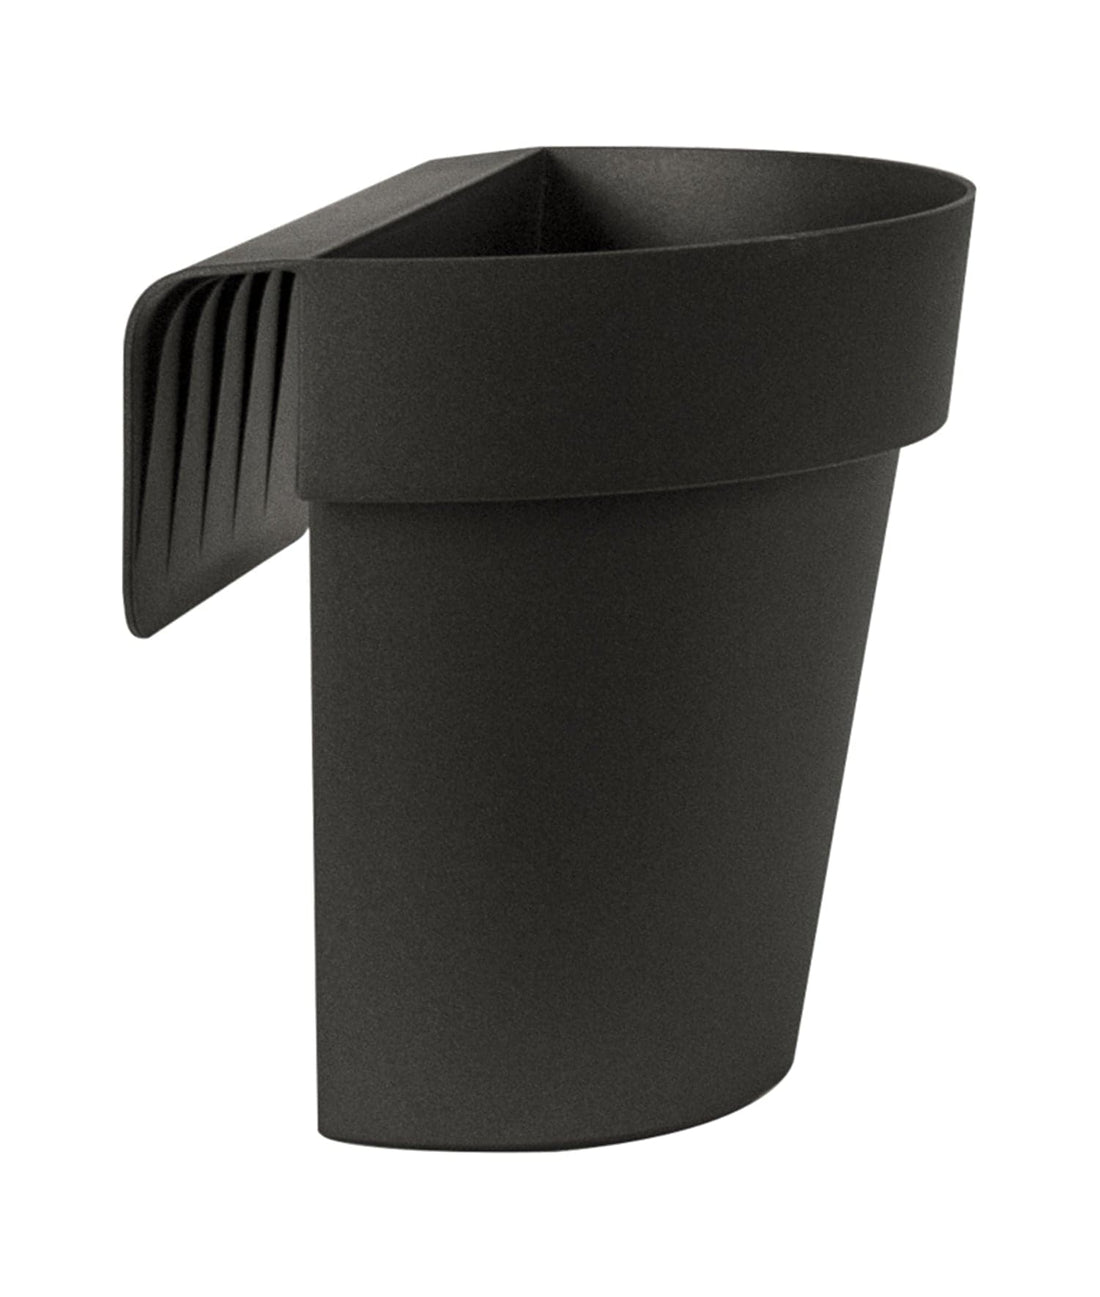 INJECTION UP VASE WITH RESERVE CM 25X20 H 23 ANTHRACITE - best price from Maltashopper.com BR500008674